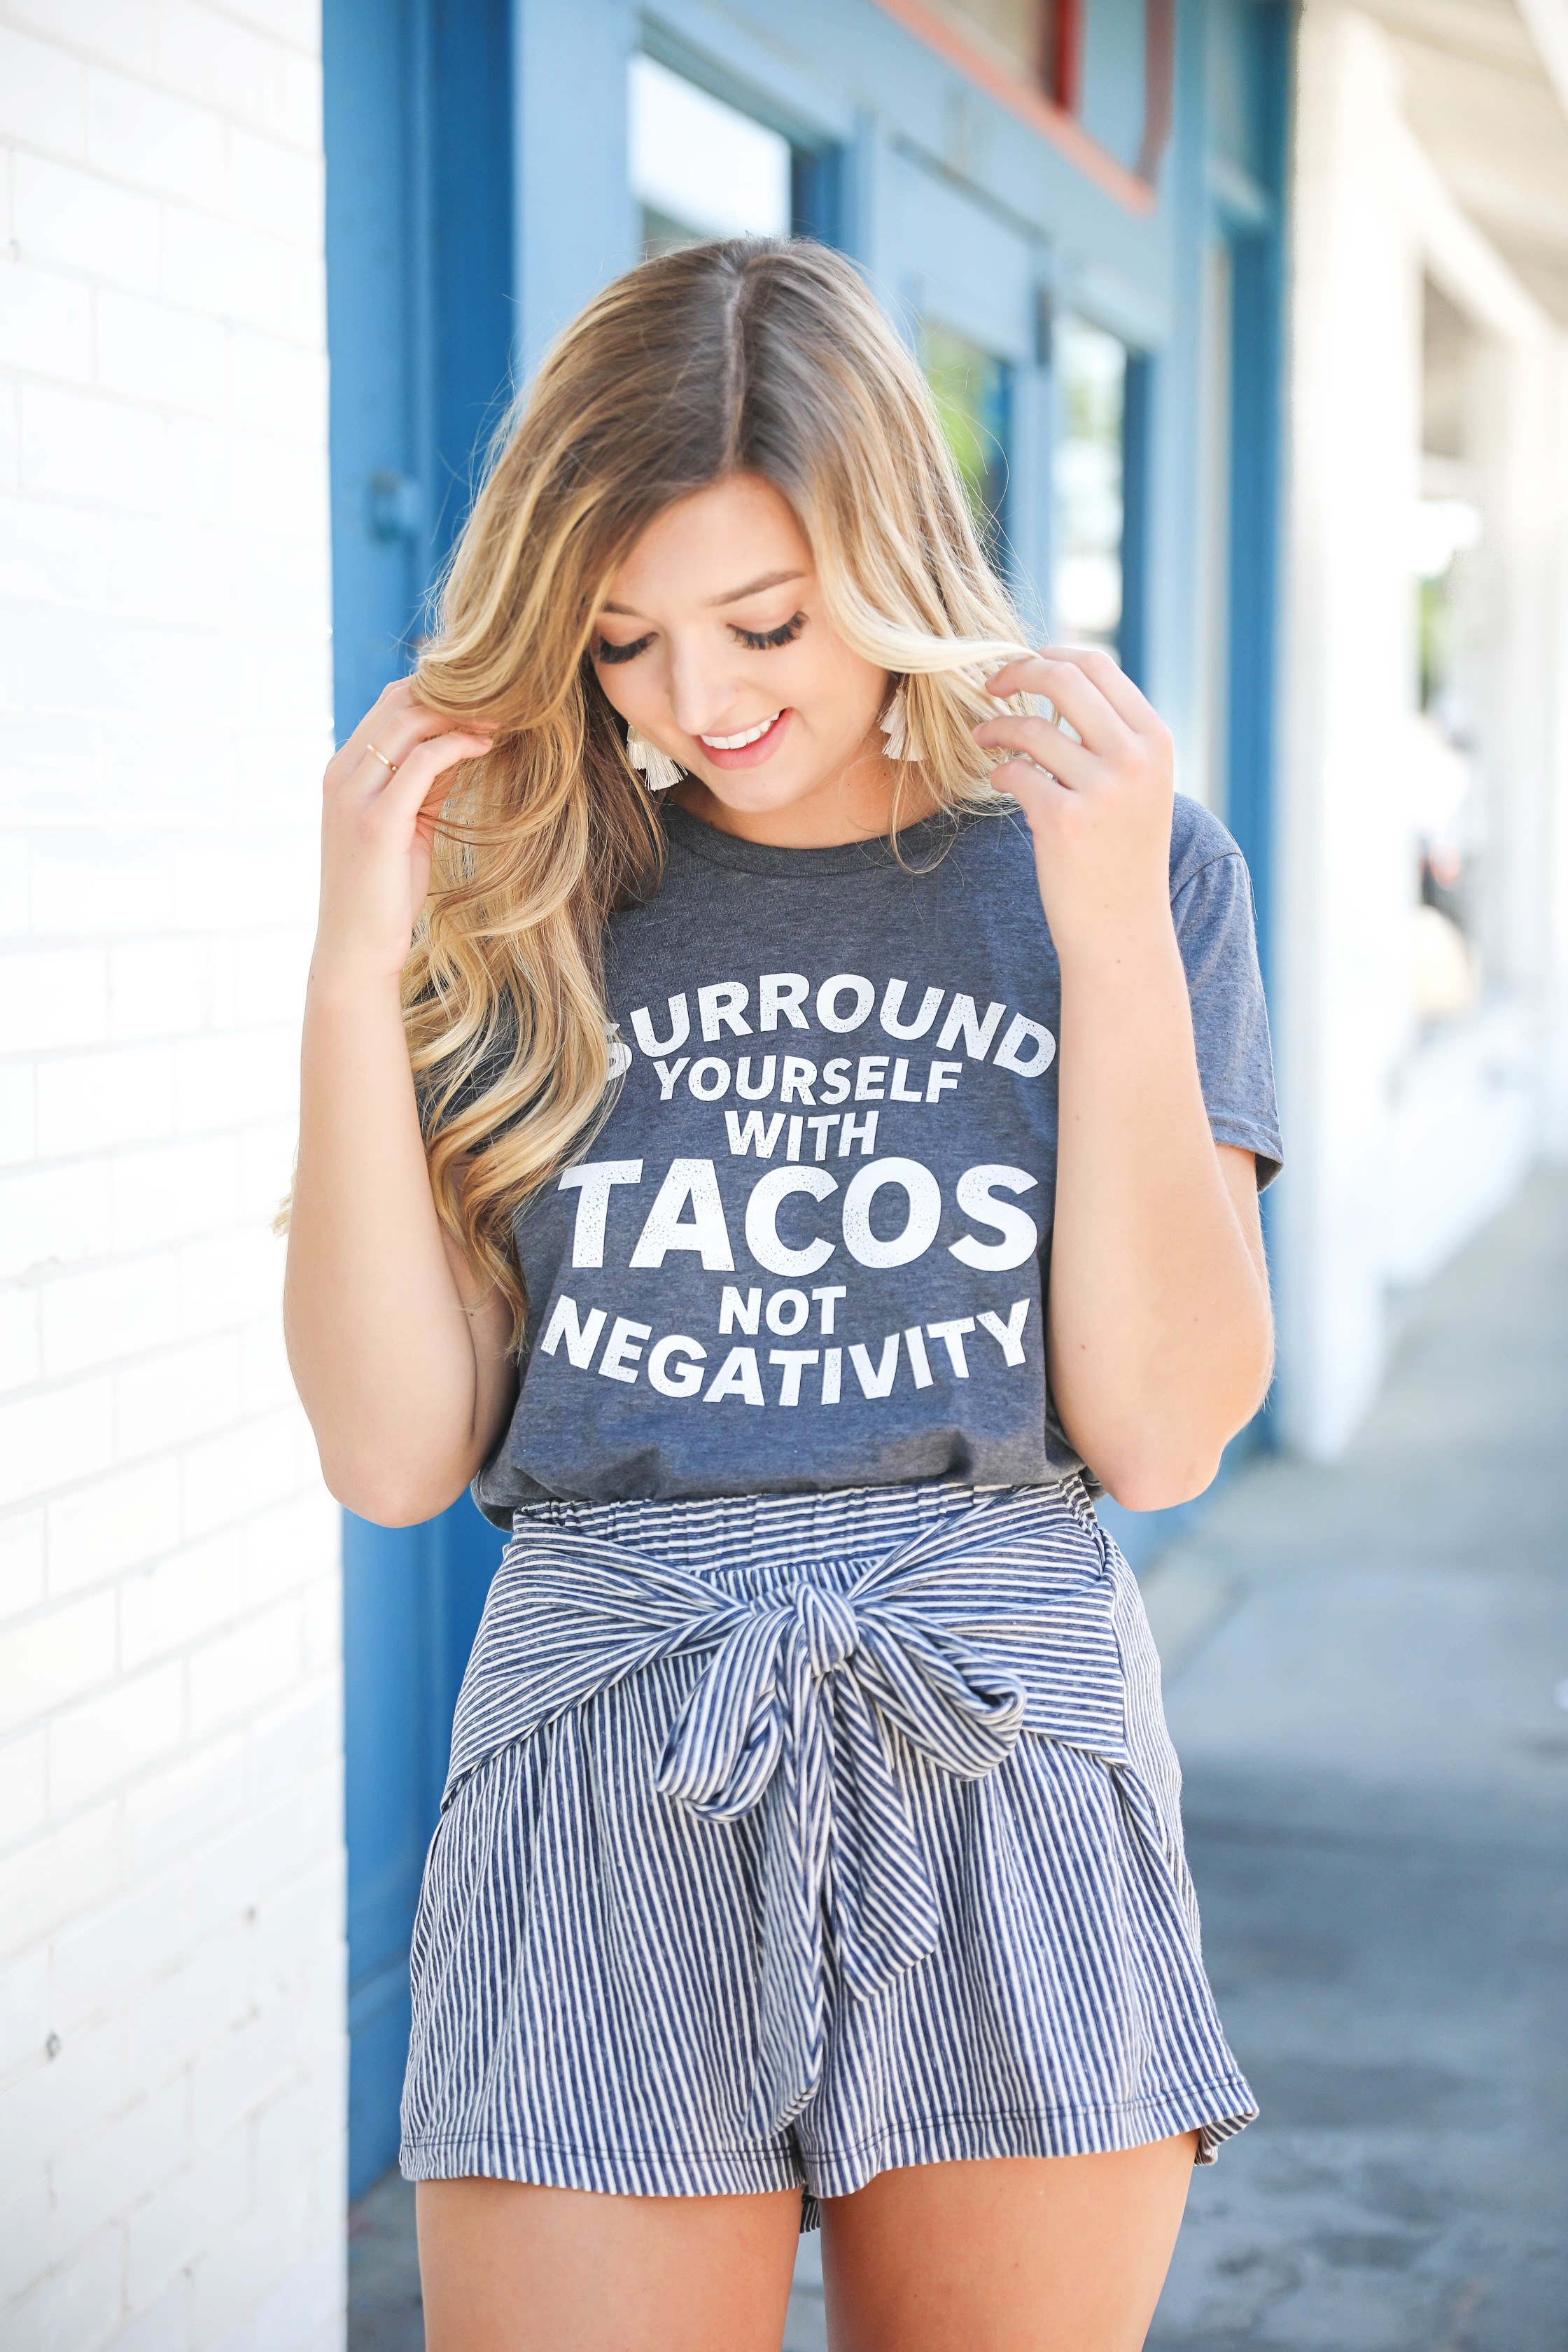 Surround yourself with tacos, not negativity. This is the cutest taco tee! I have been loving for a cute taco tshirt and this one is adorable with my striped cotton shorts! Tied shorts are so in right now! Summer fashion details on the blog daily dose of charm by lauren lindmark